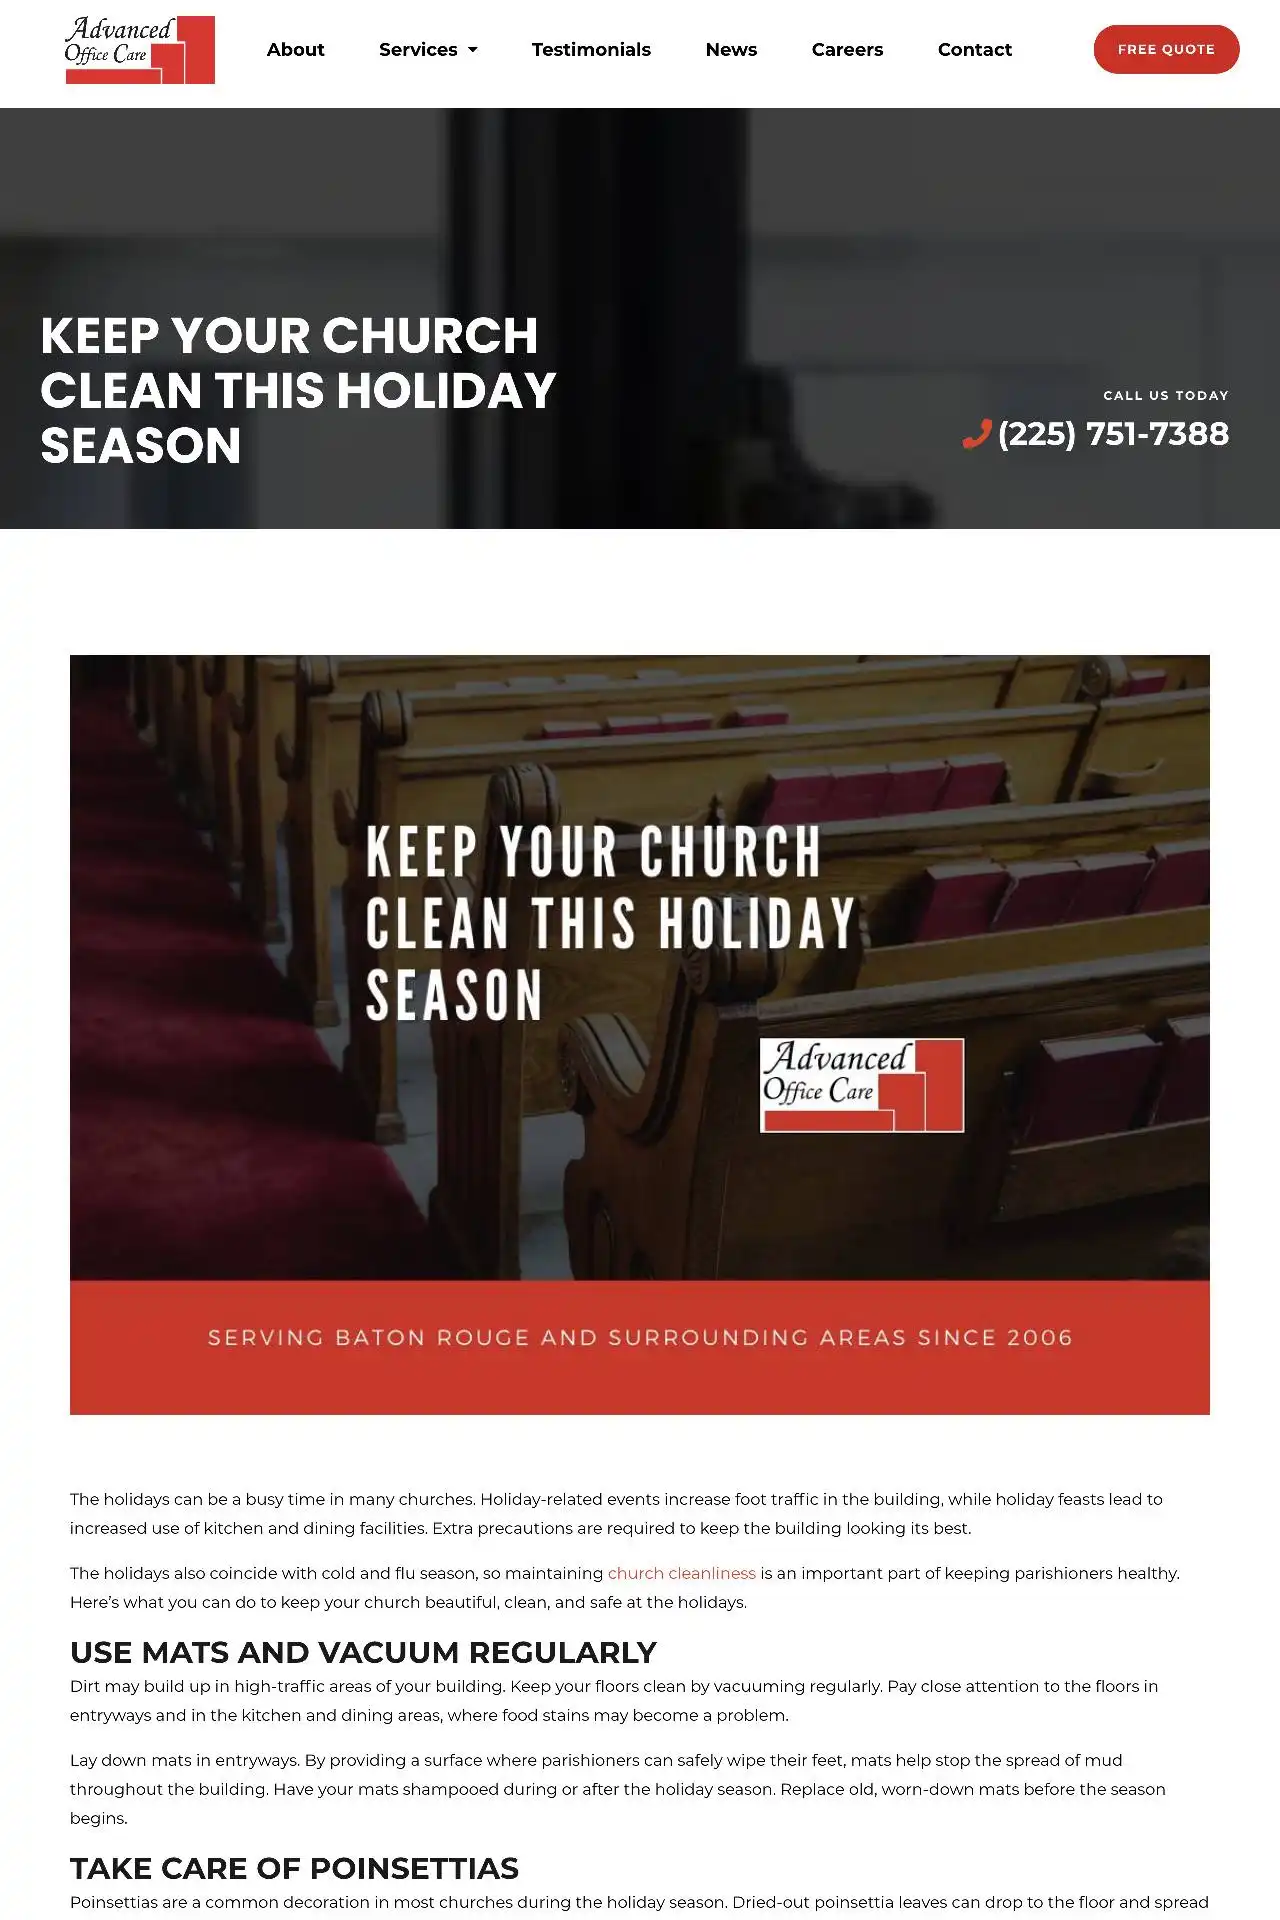 baton rouge cleaning company website design development https aocla.com cleaning keep your church clean this holiday season